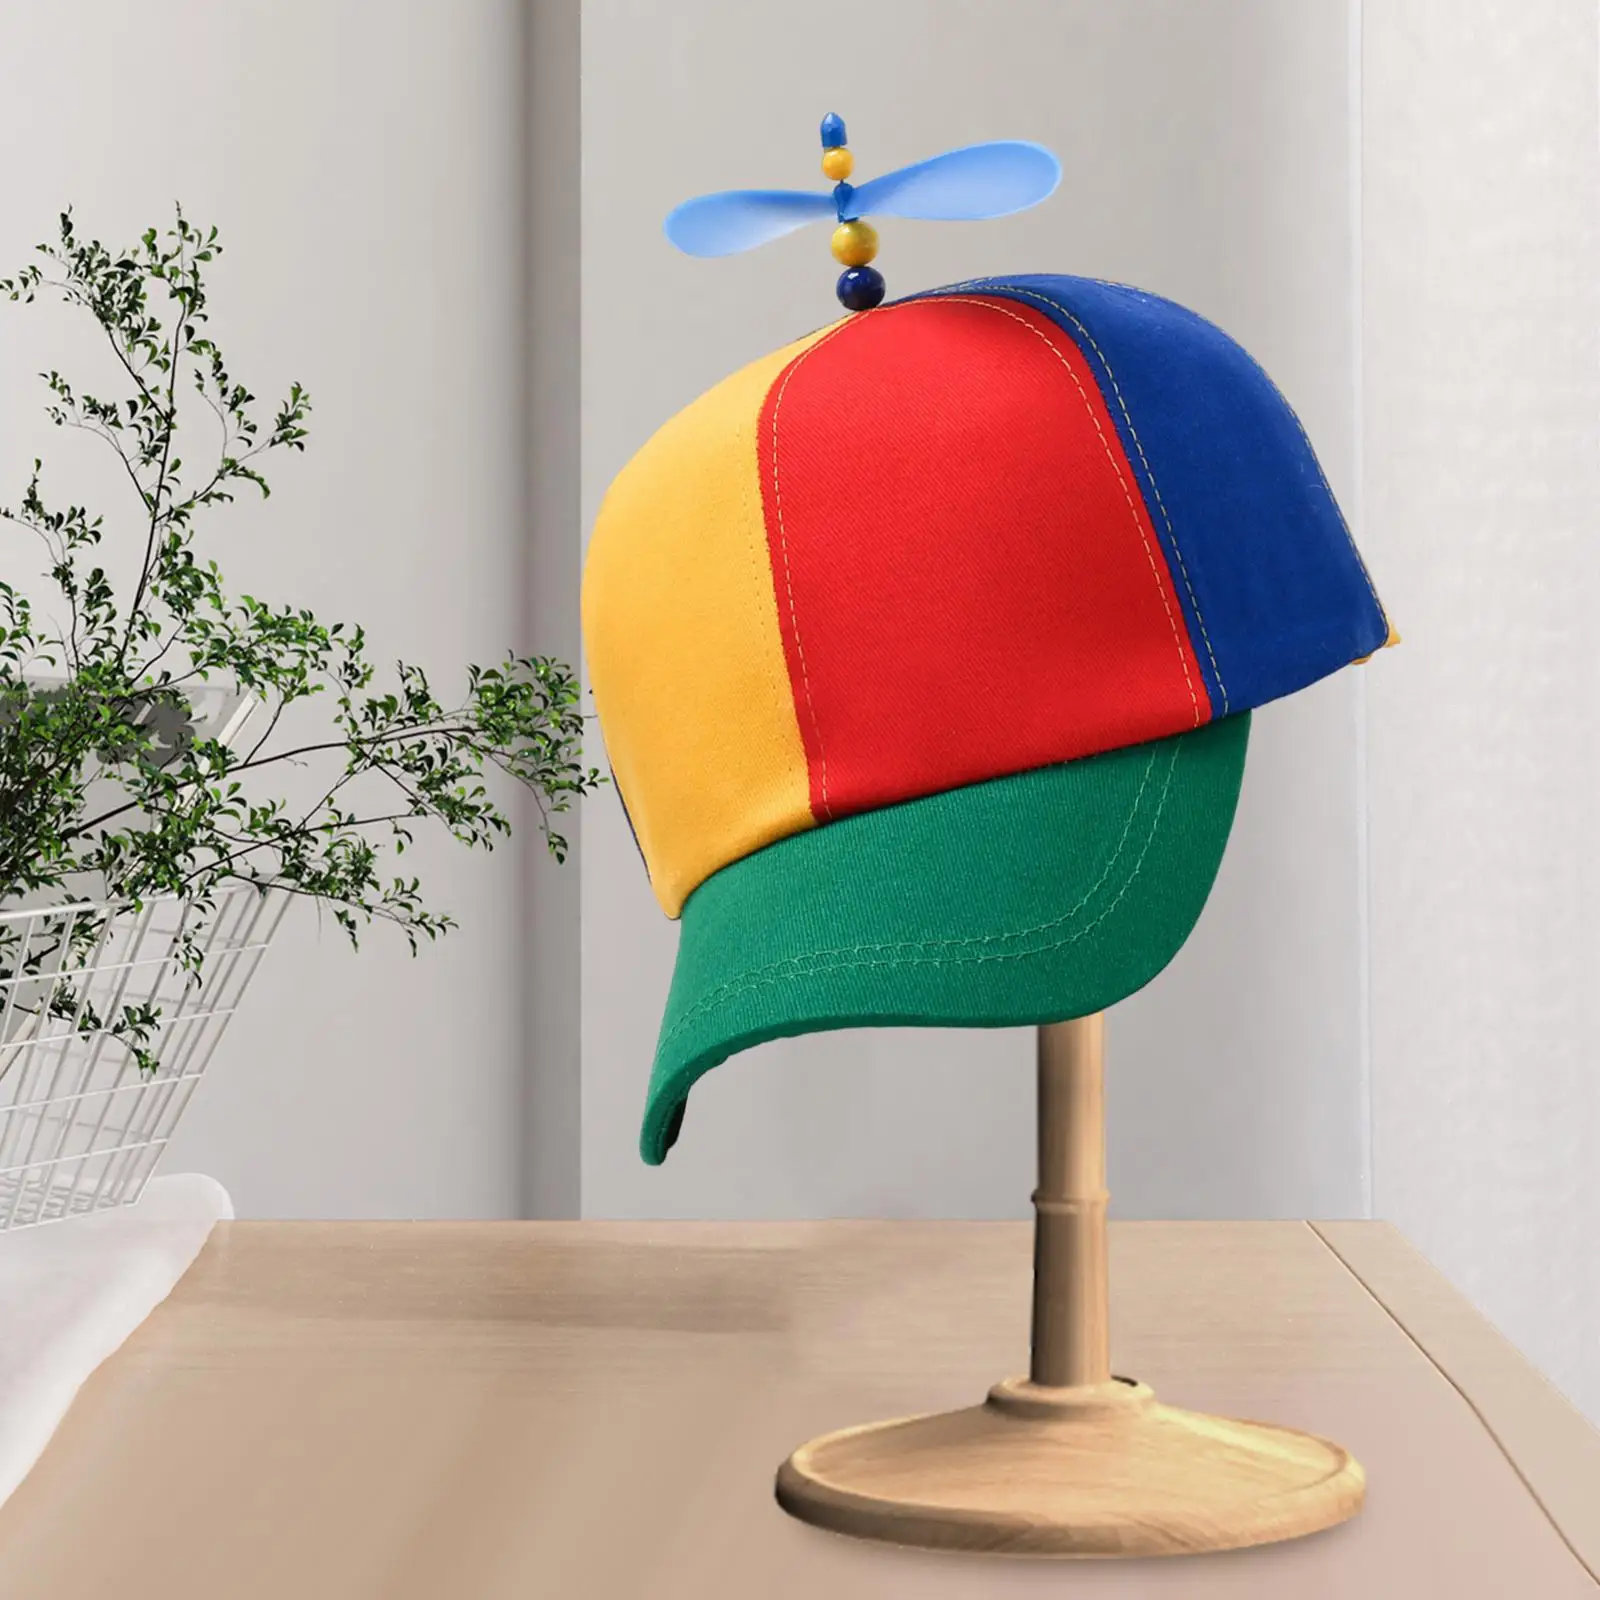 Colorful , Adjustable Size Propeller Ball Hat Decoration Fashion Novelty Baseball Hat for Daily Wear Adult 